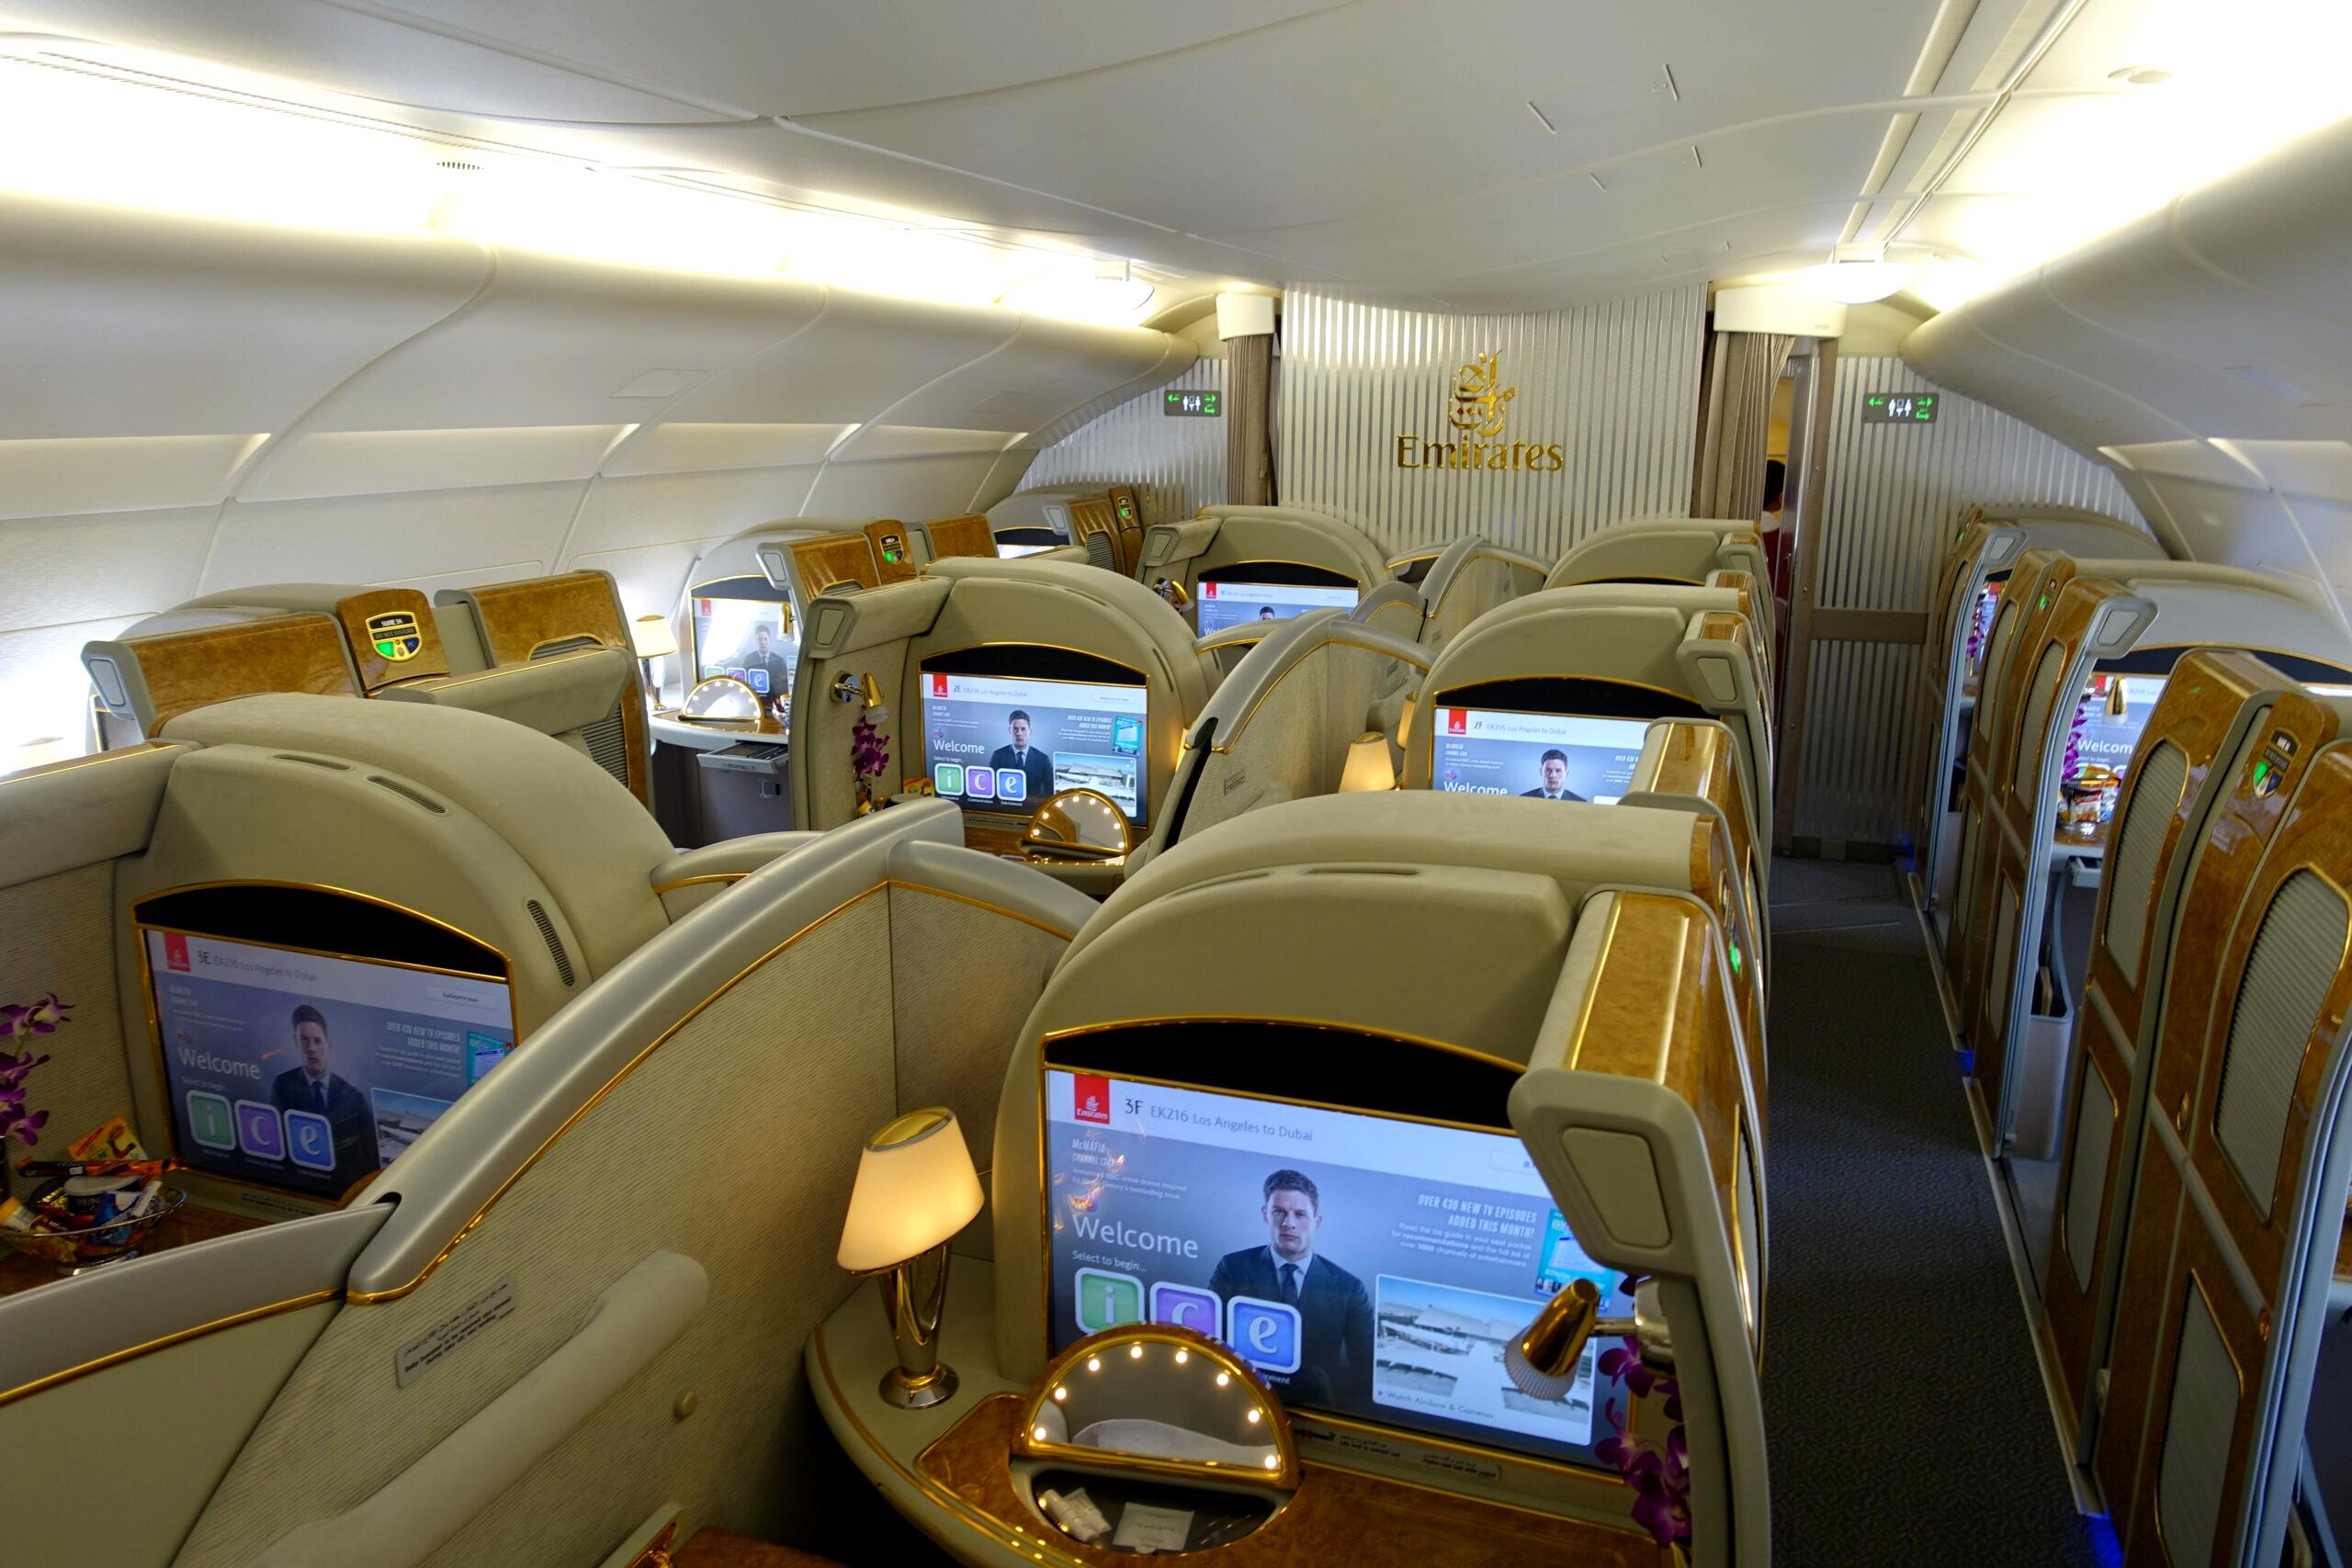 Fly Emirates Plane Gifts & Merchandise for Sale